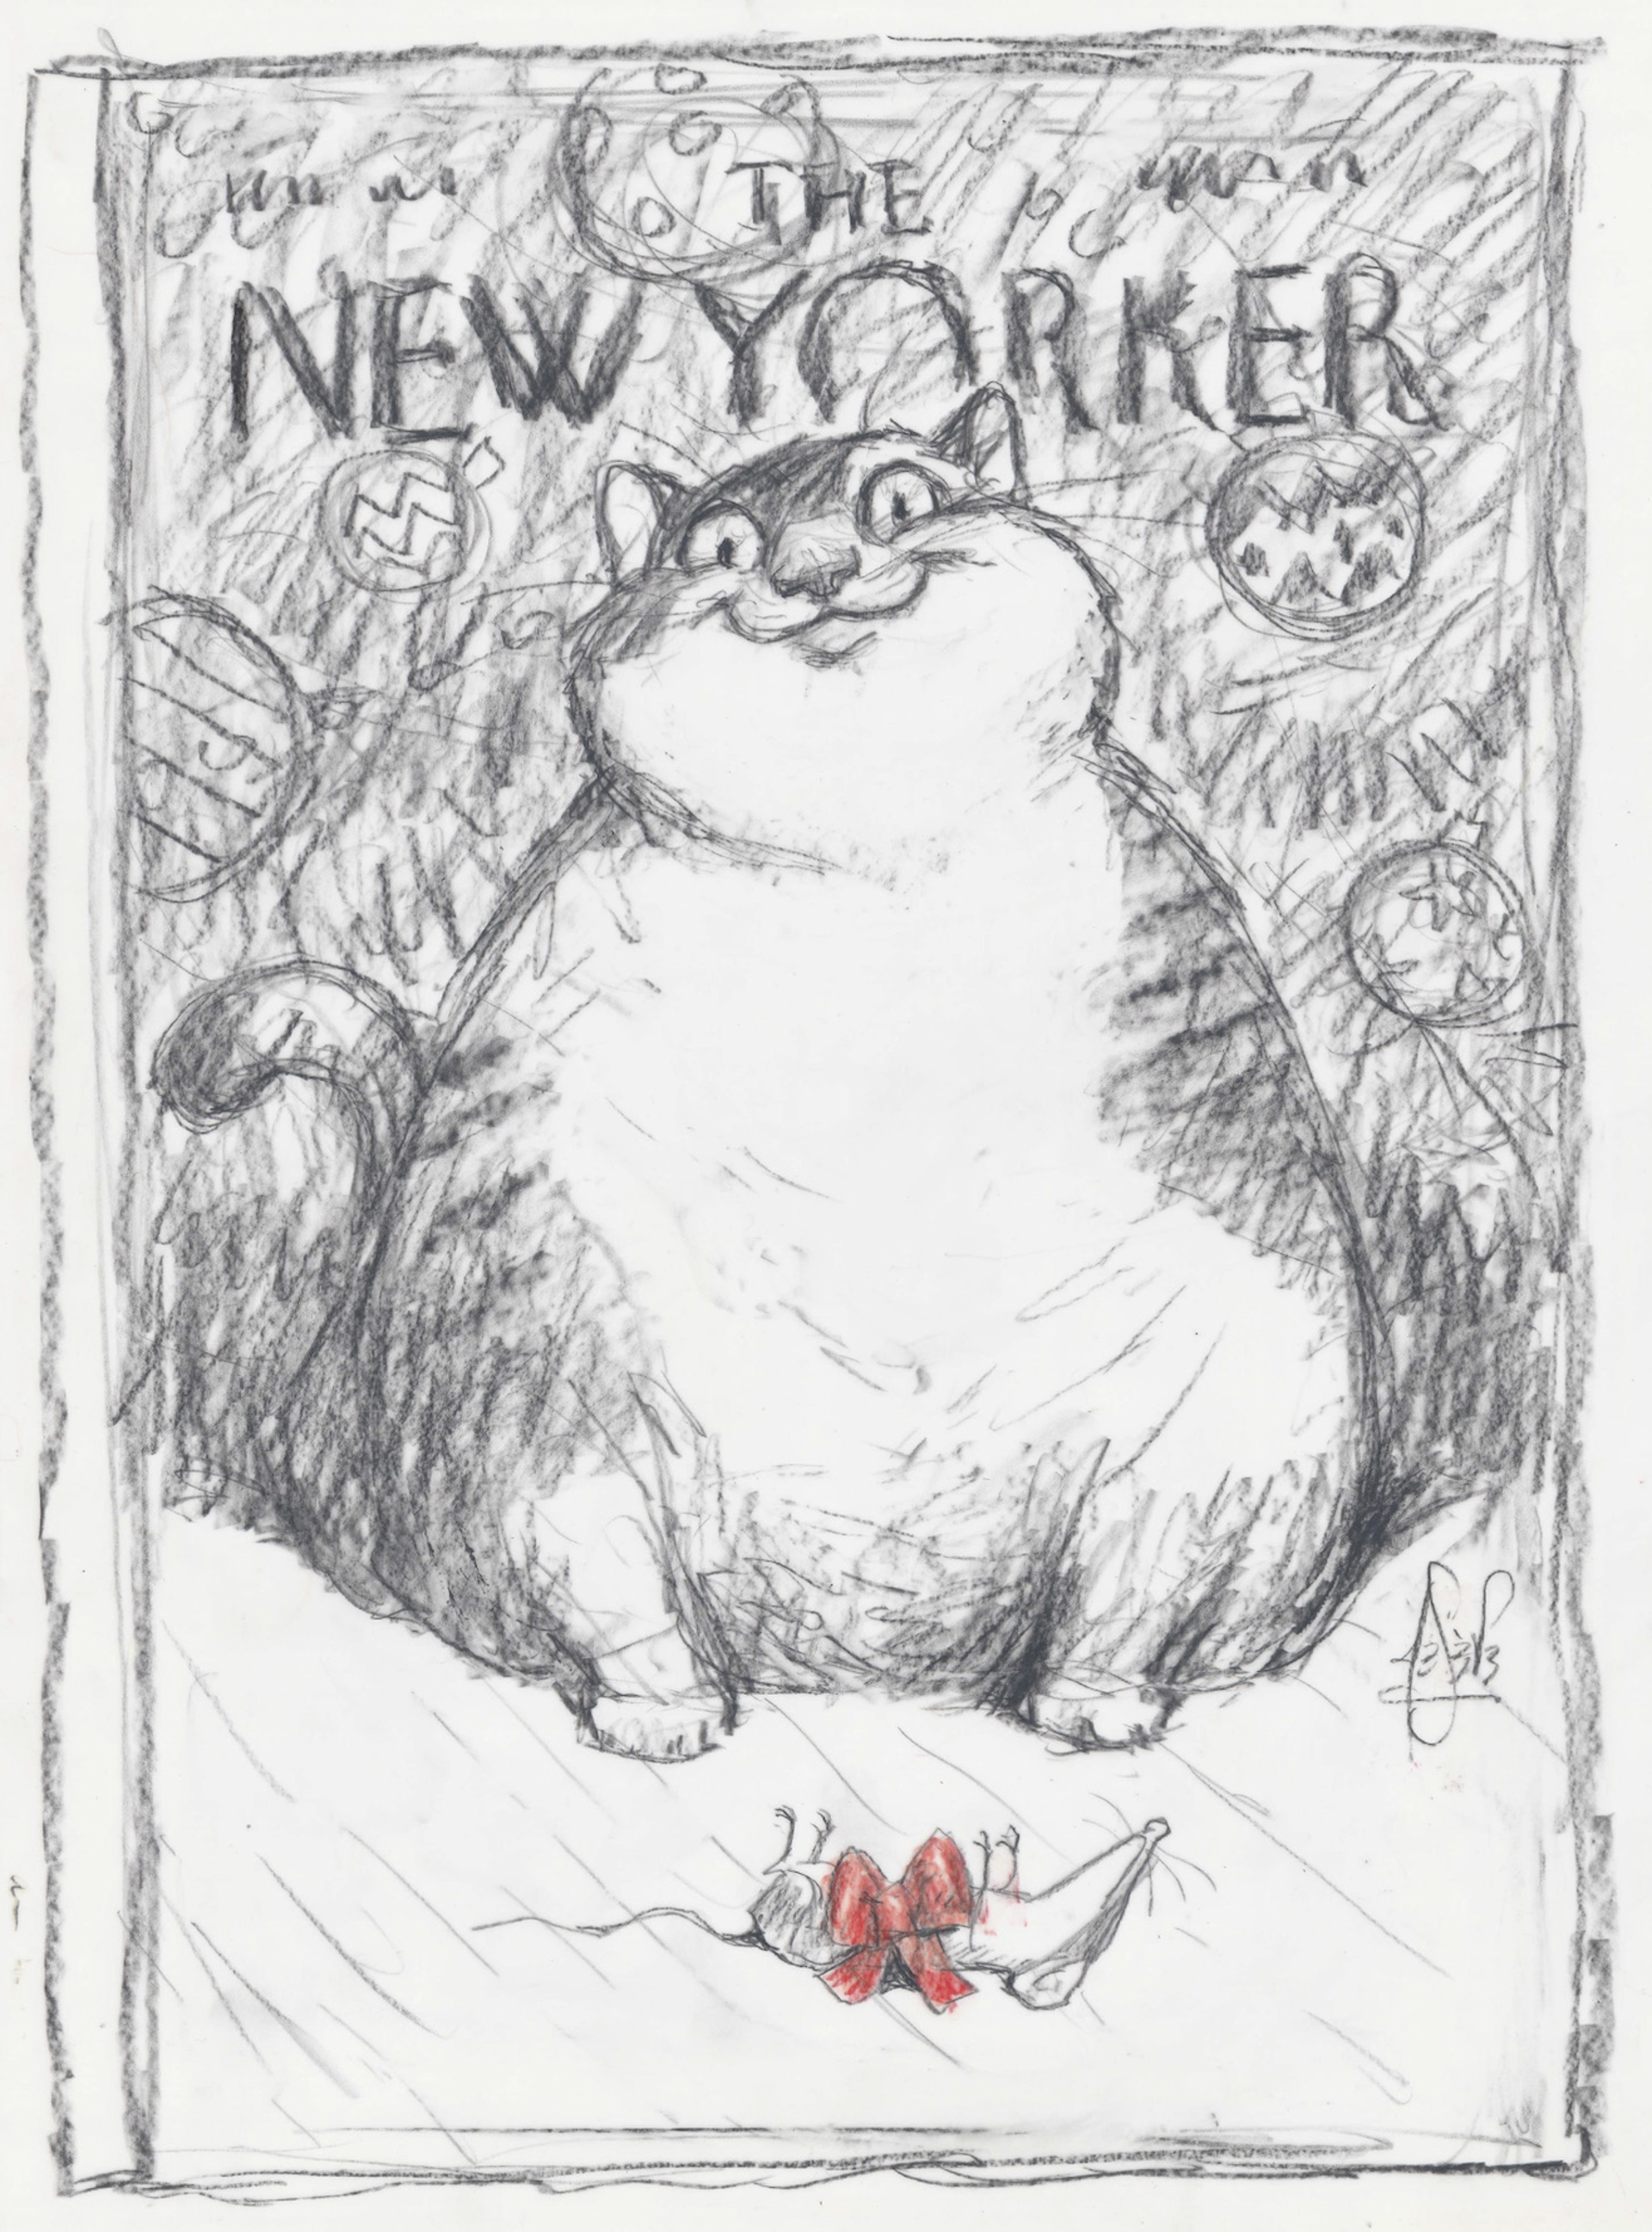 Proposed sketch for New Yorker Cover "Go on, open it!" by Peter de Sève